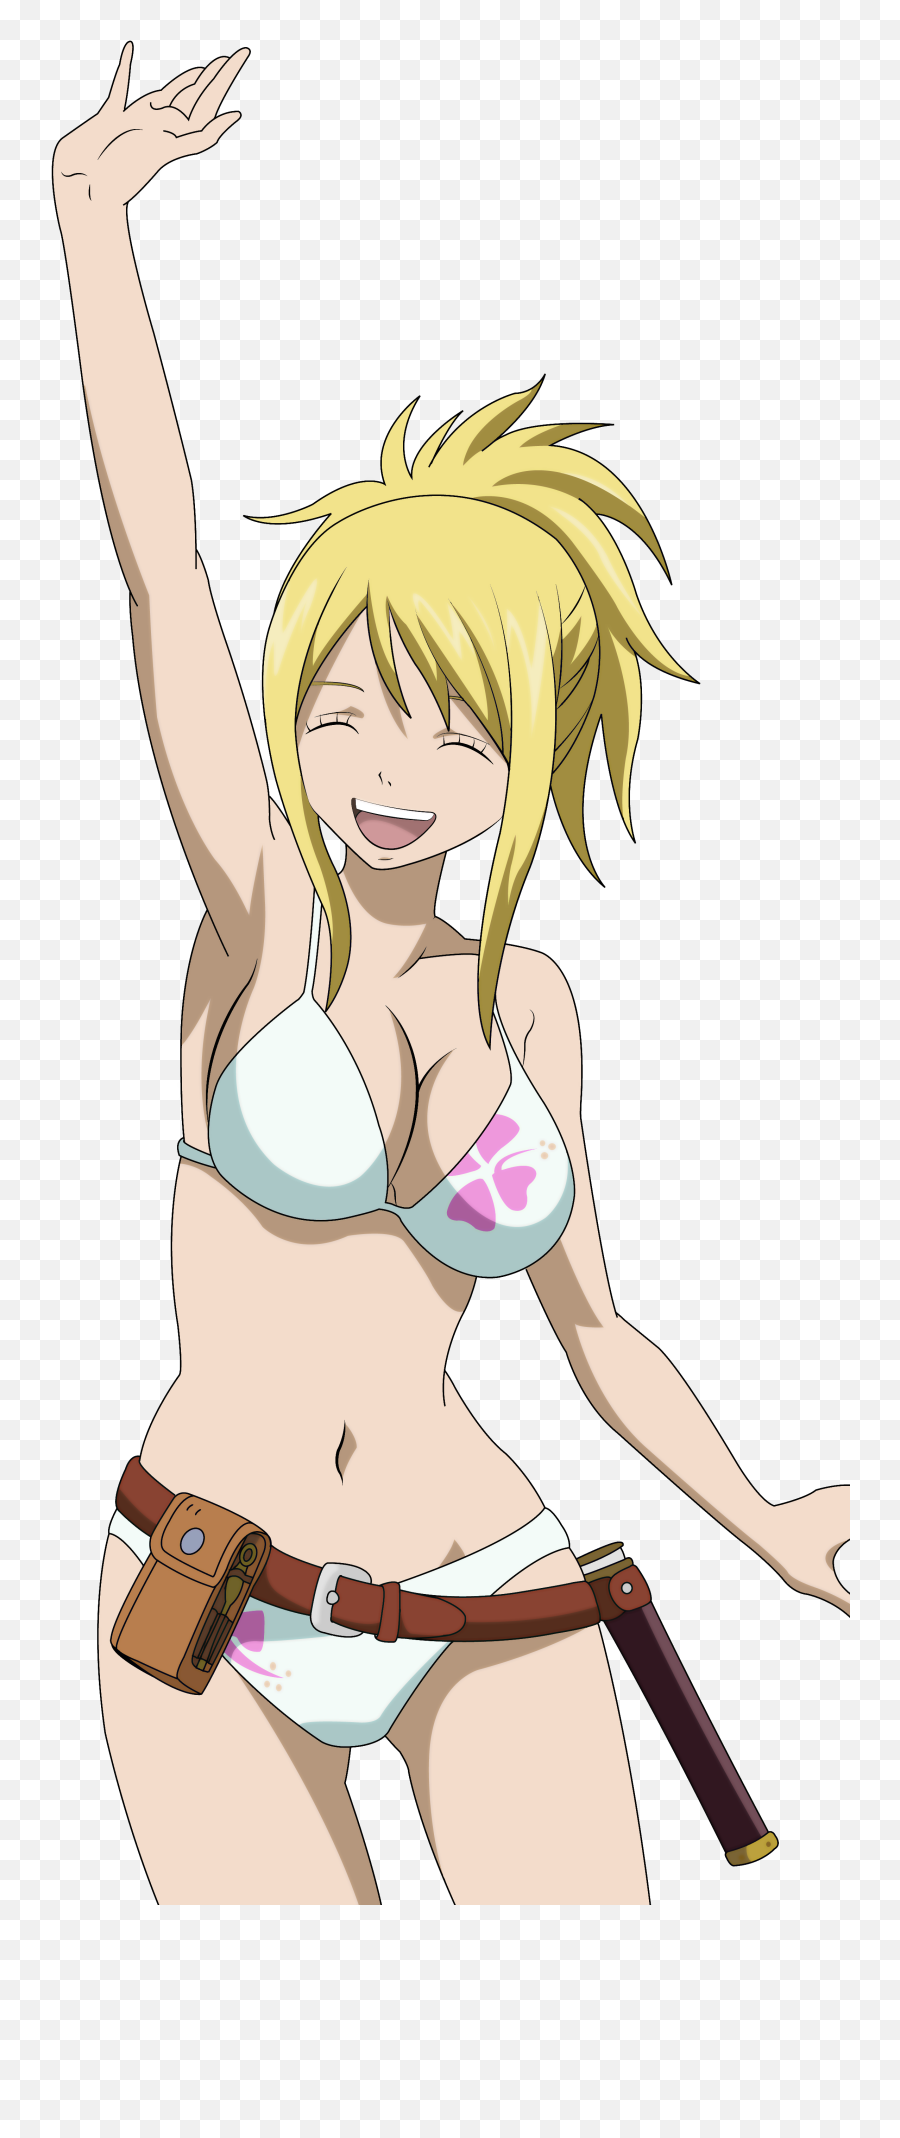 Download Fairy Tail Lucy Heartfilia - Fairy Tail Lucy Heartfilia Swimwear Png,Lucy Heartfilia Transparent